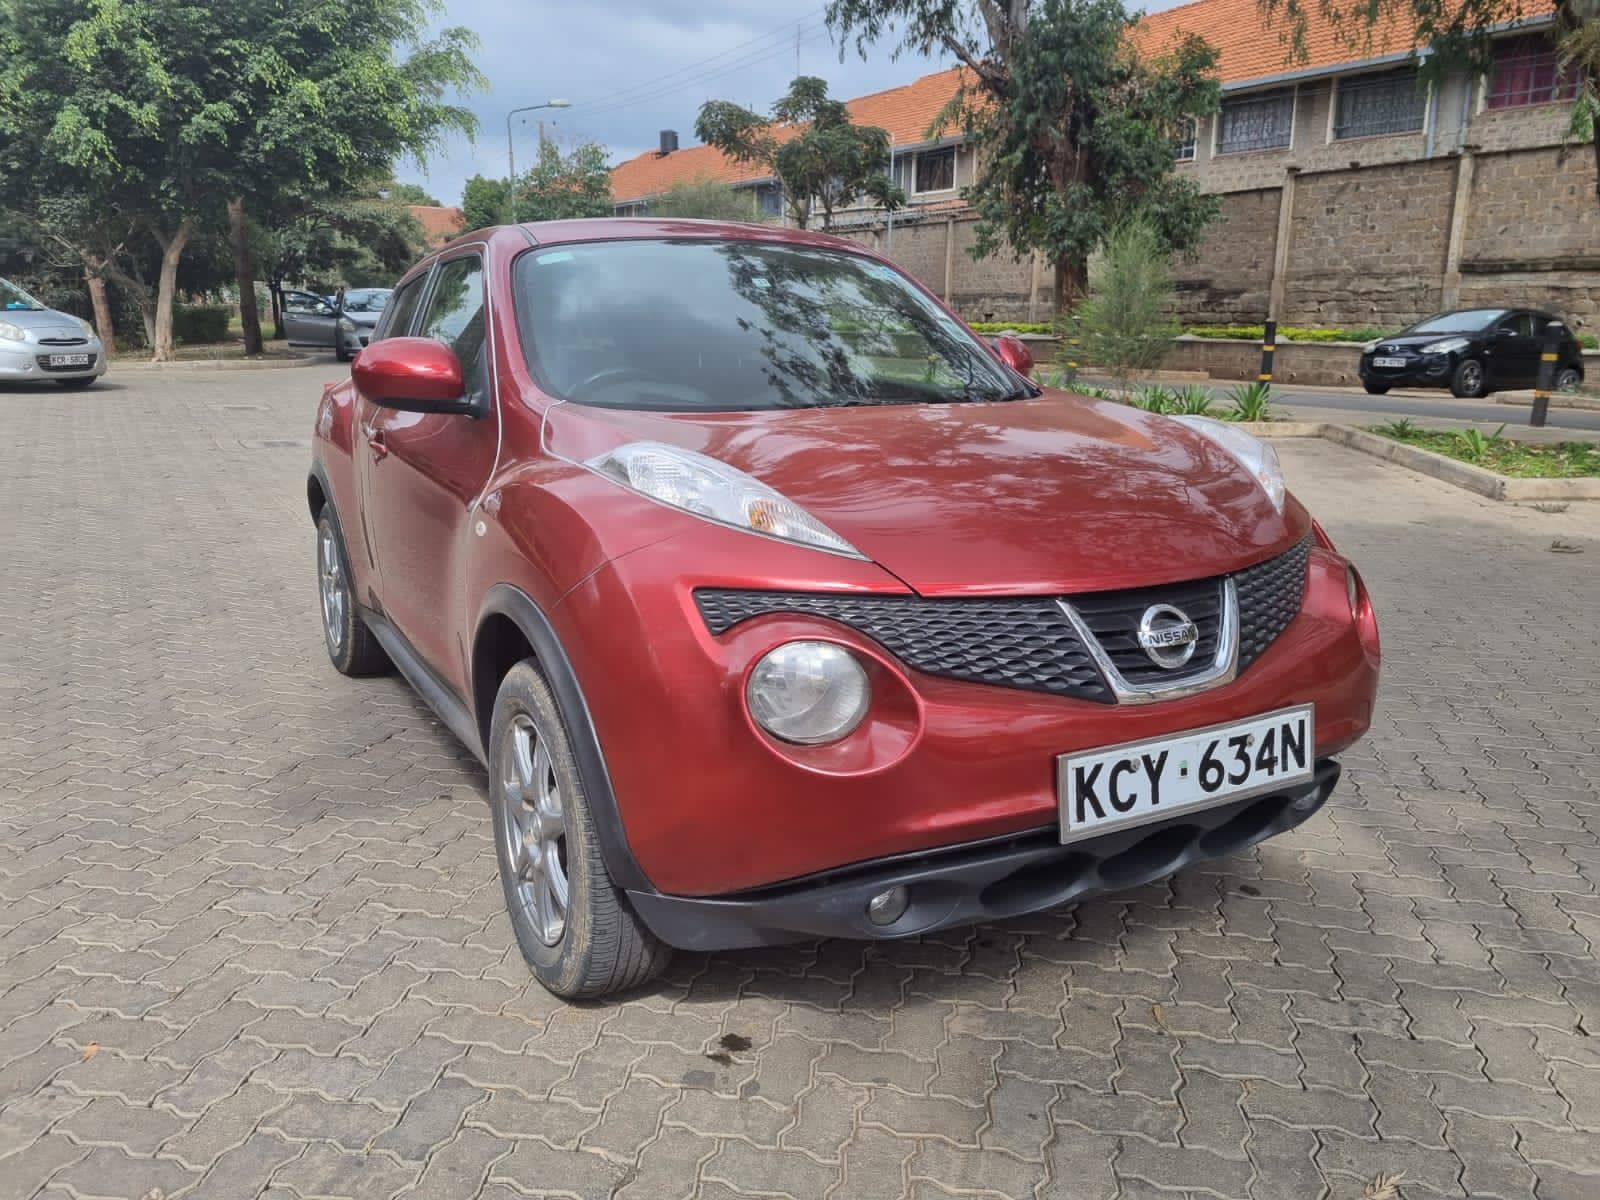 Nissan Juke 2013 Pay 30% Balance in  60 months.  Cheapest New